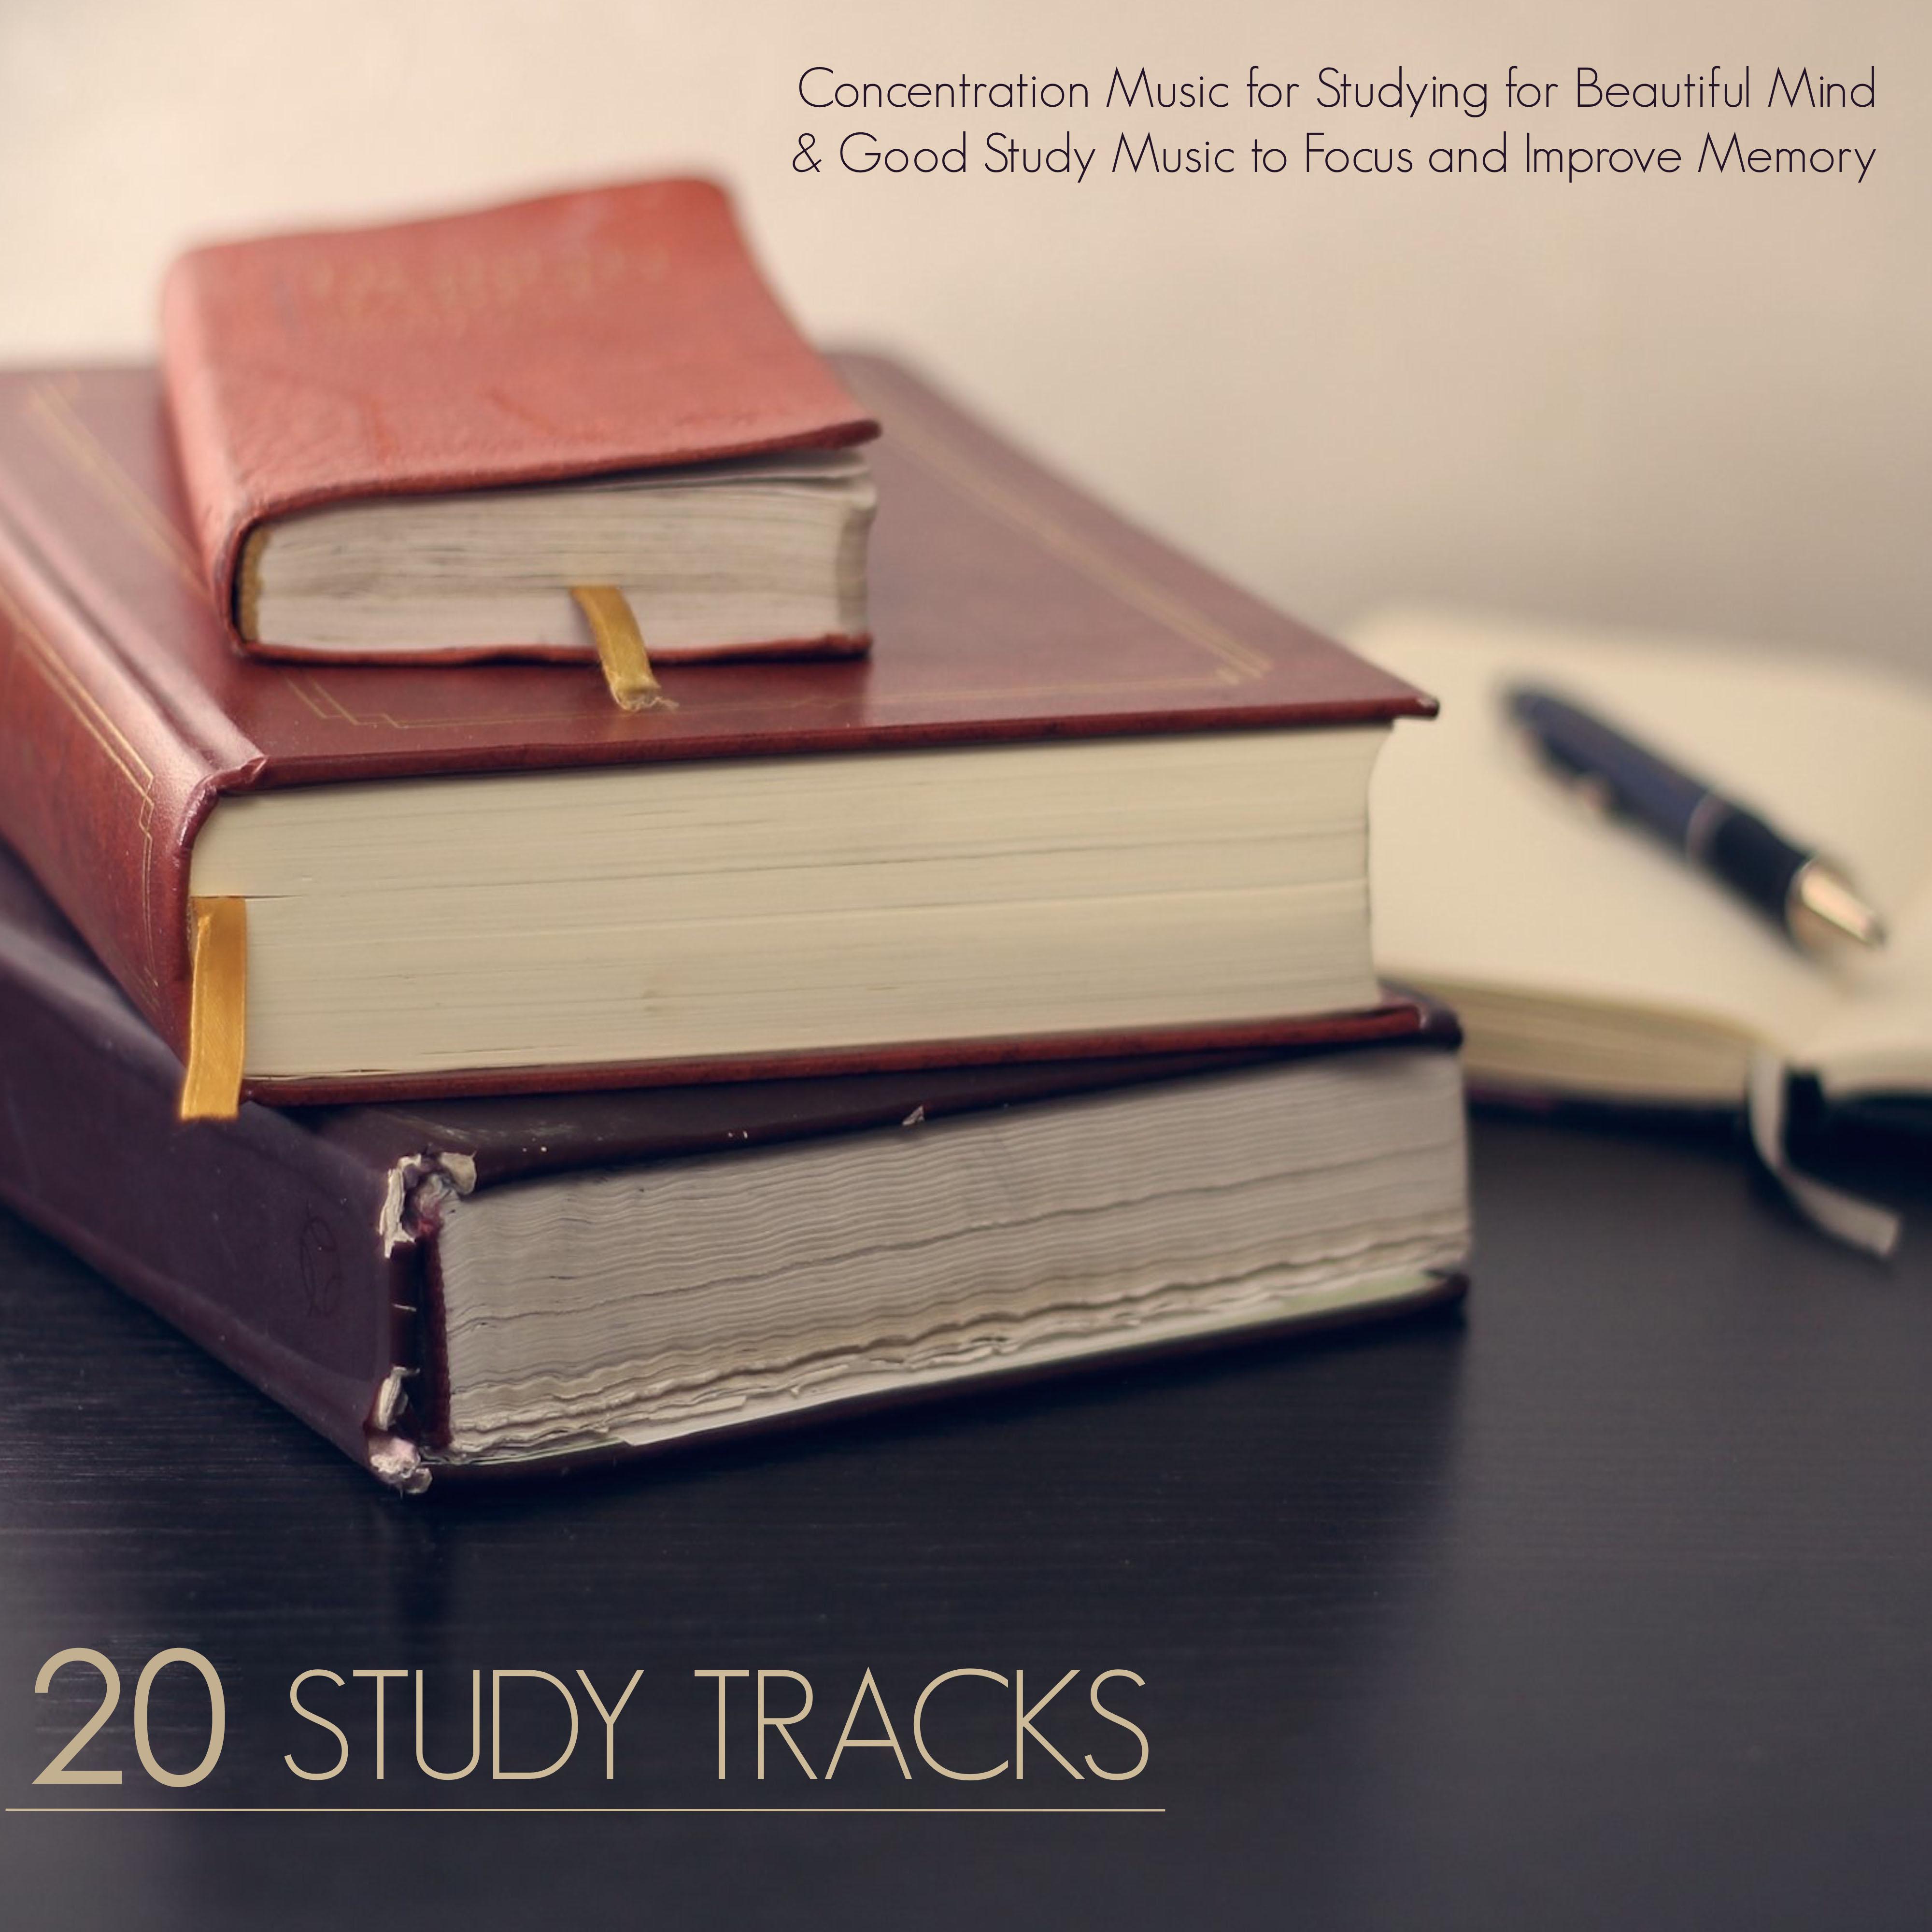 20 Study Tracks - Concentration Music for Studying for Beautiful Mind & Good Study Music to Focus and Improve Memory